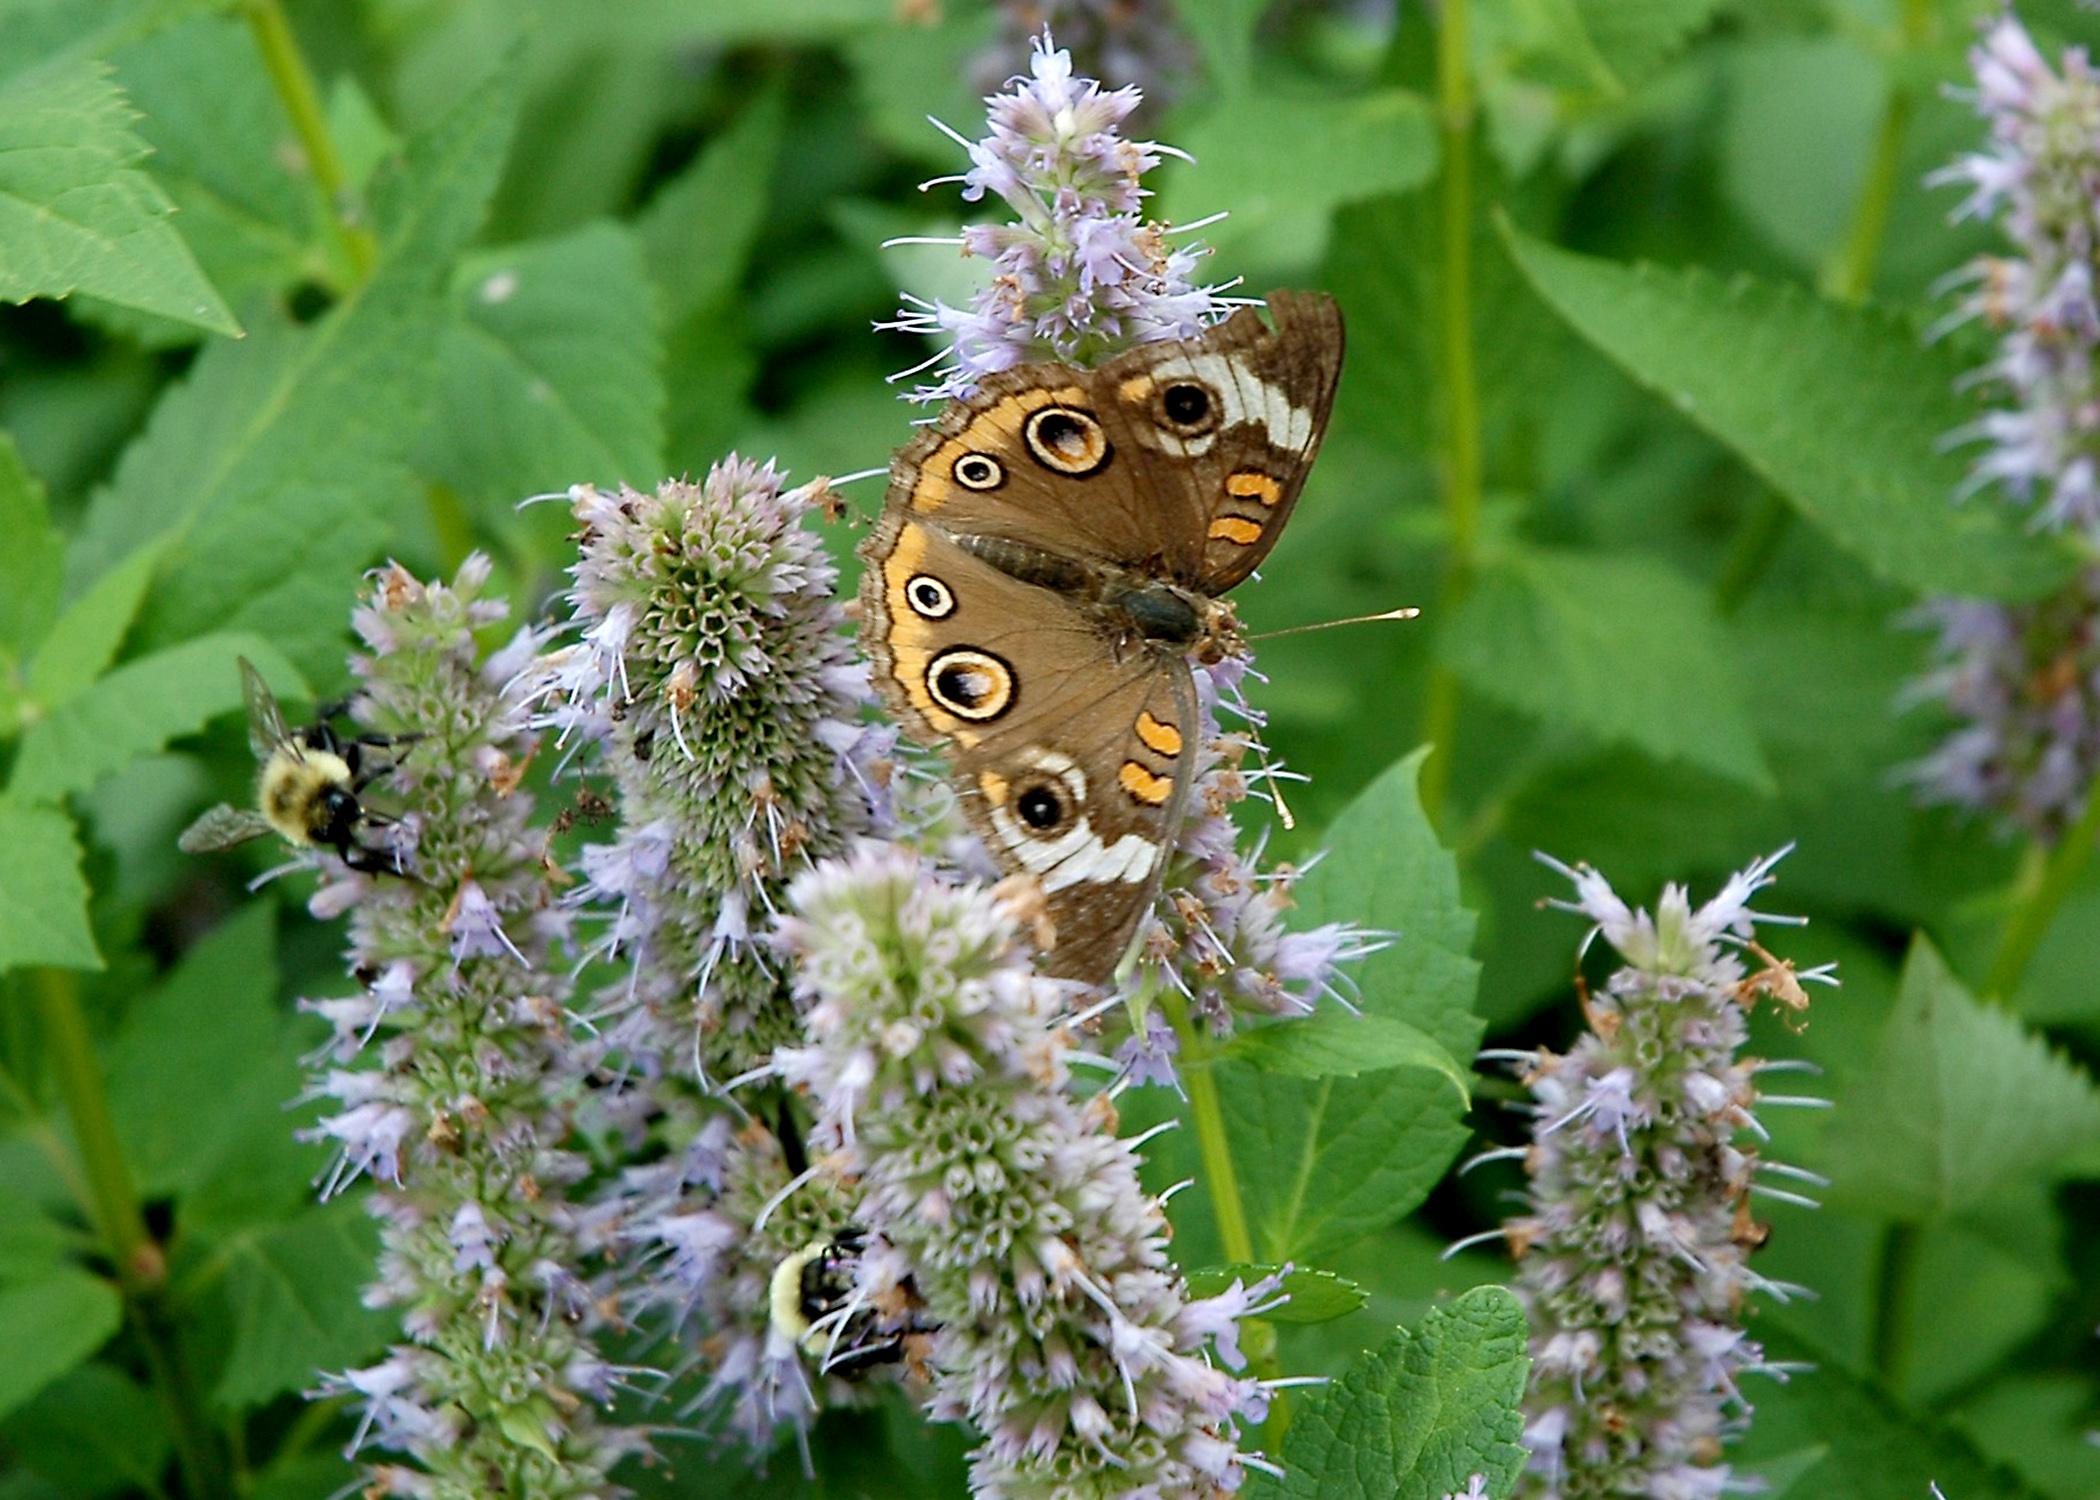 Butterflies, such as this buckeye butterfly, and other plants, animals and insects will be counted during the Mississippi BioBlitz on Oct. 4, 2014, at the Natchez Trace Parkway Visitor Center near Tupelo. BioBlitz is a 13-hour event that teams scientists, students, teachers and community members to track down and identify as many local species as possible. (MSU Ag Communications/File Photo)